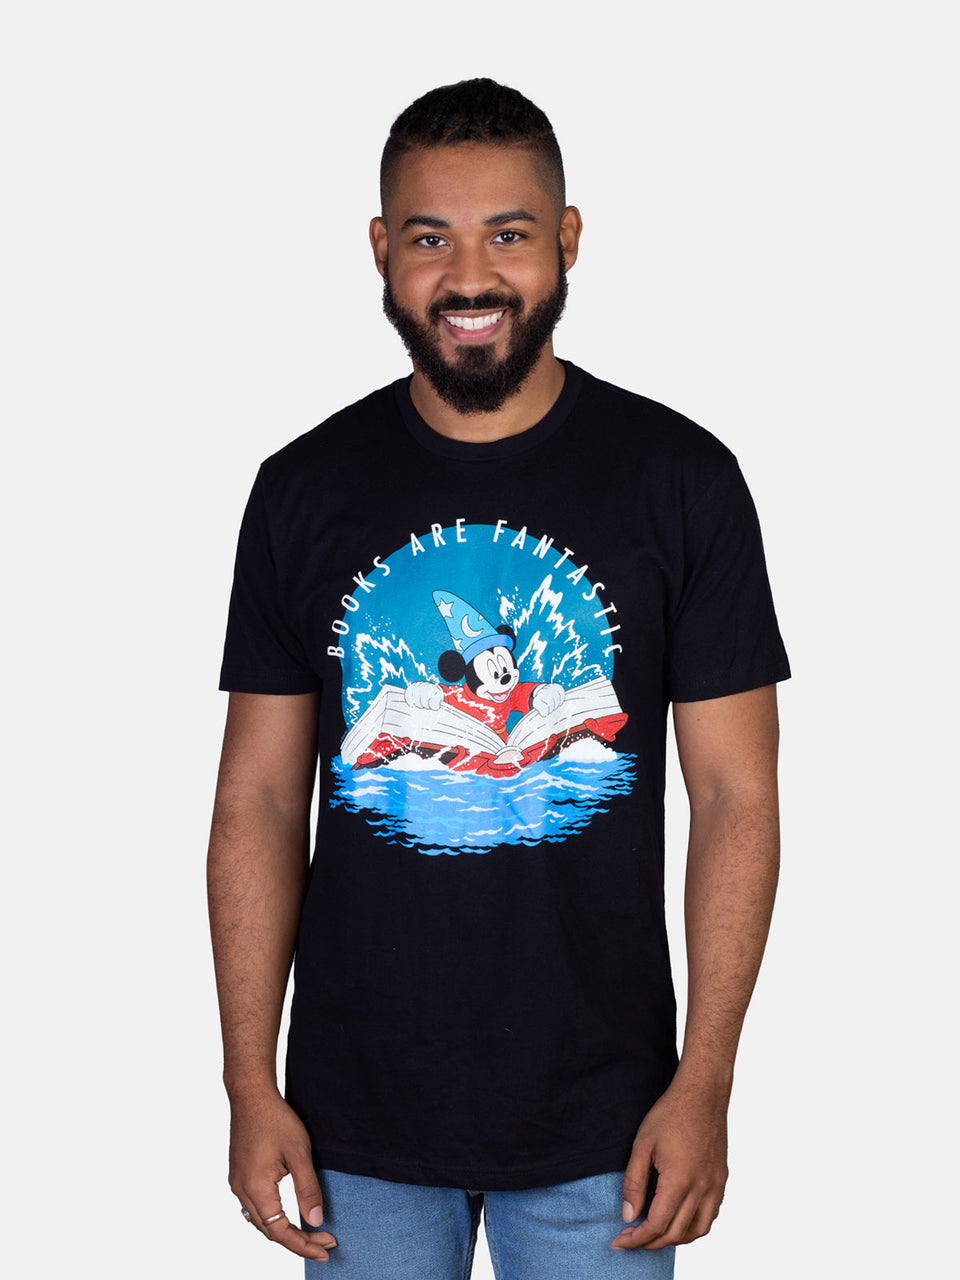 Disney Mickey and Minnie Mouse Reading kids t-shirt — Out of Print